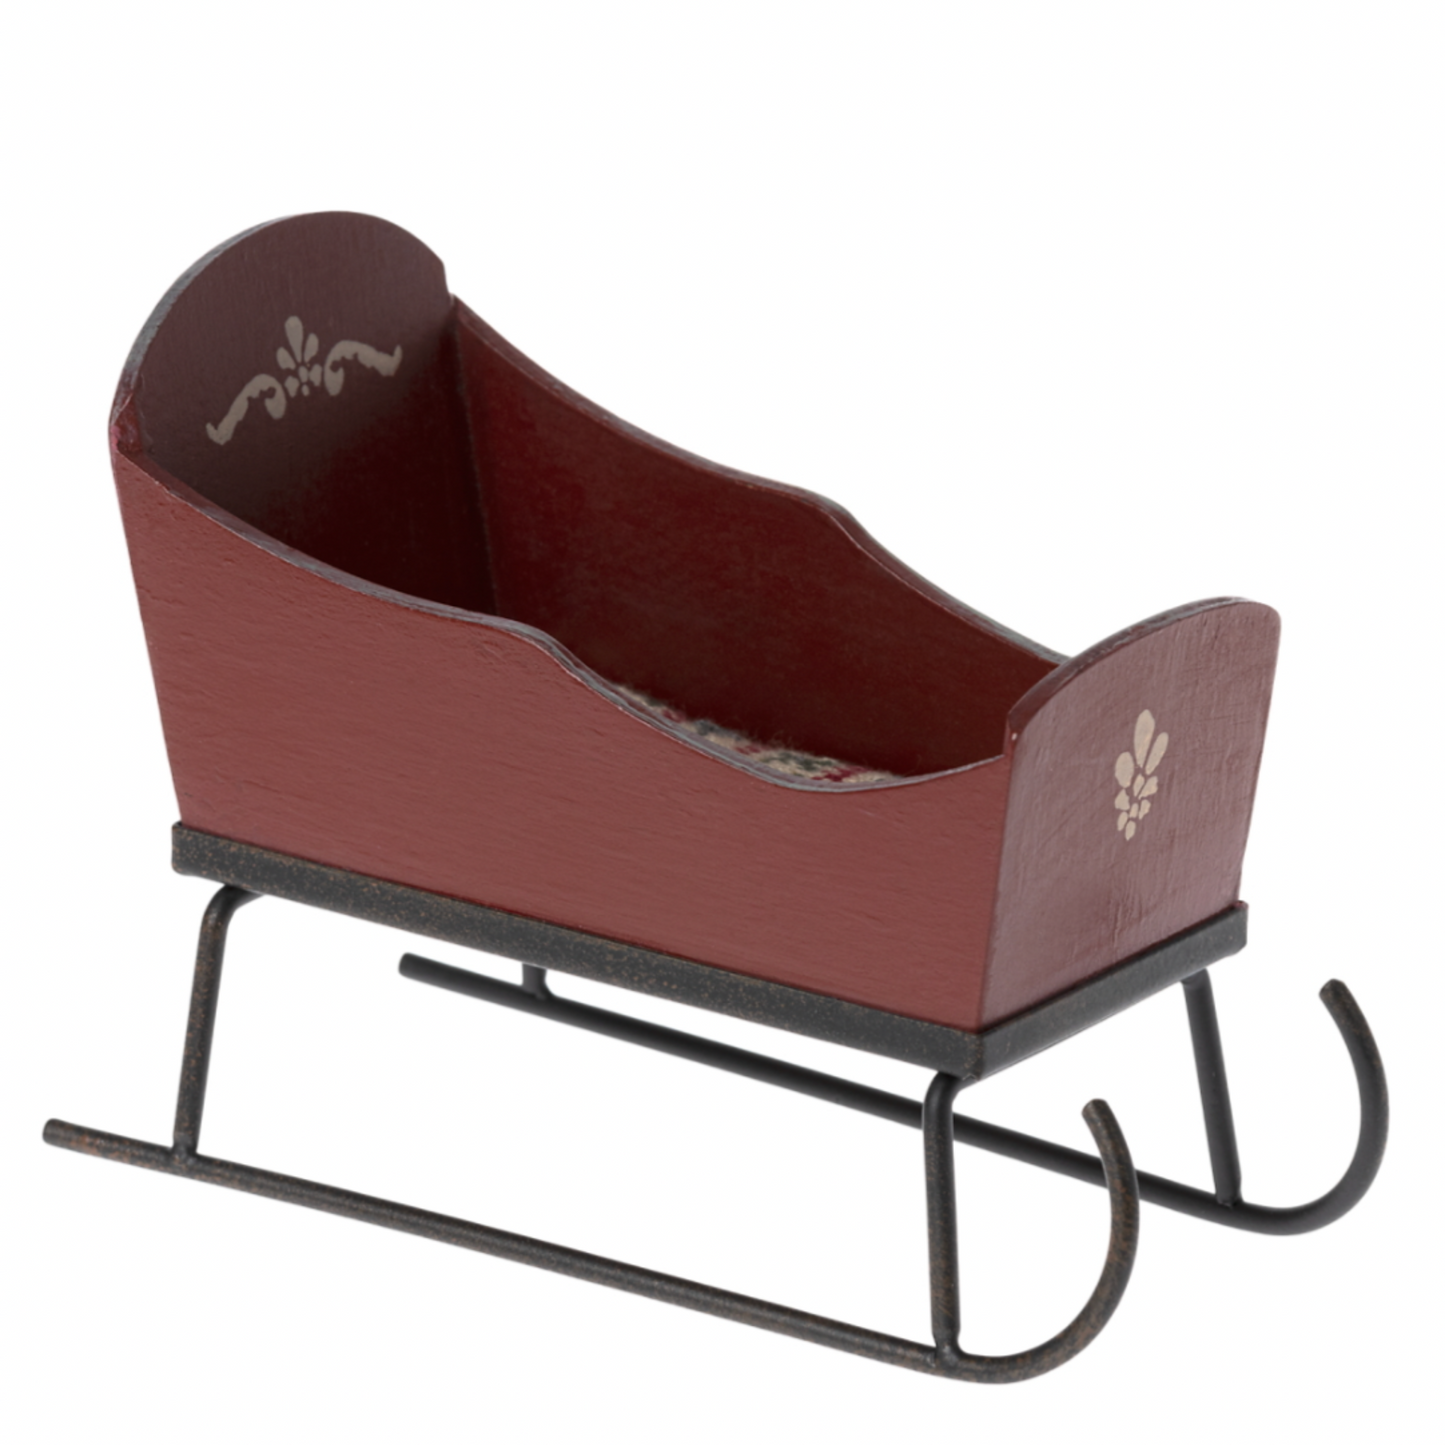 Maileg Sleigh for Mouse, Red (6662401687617)